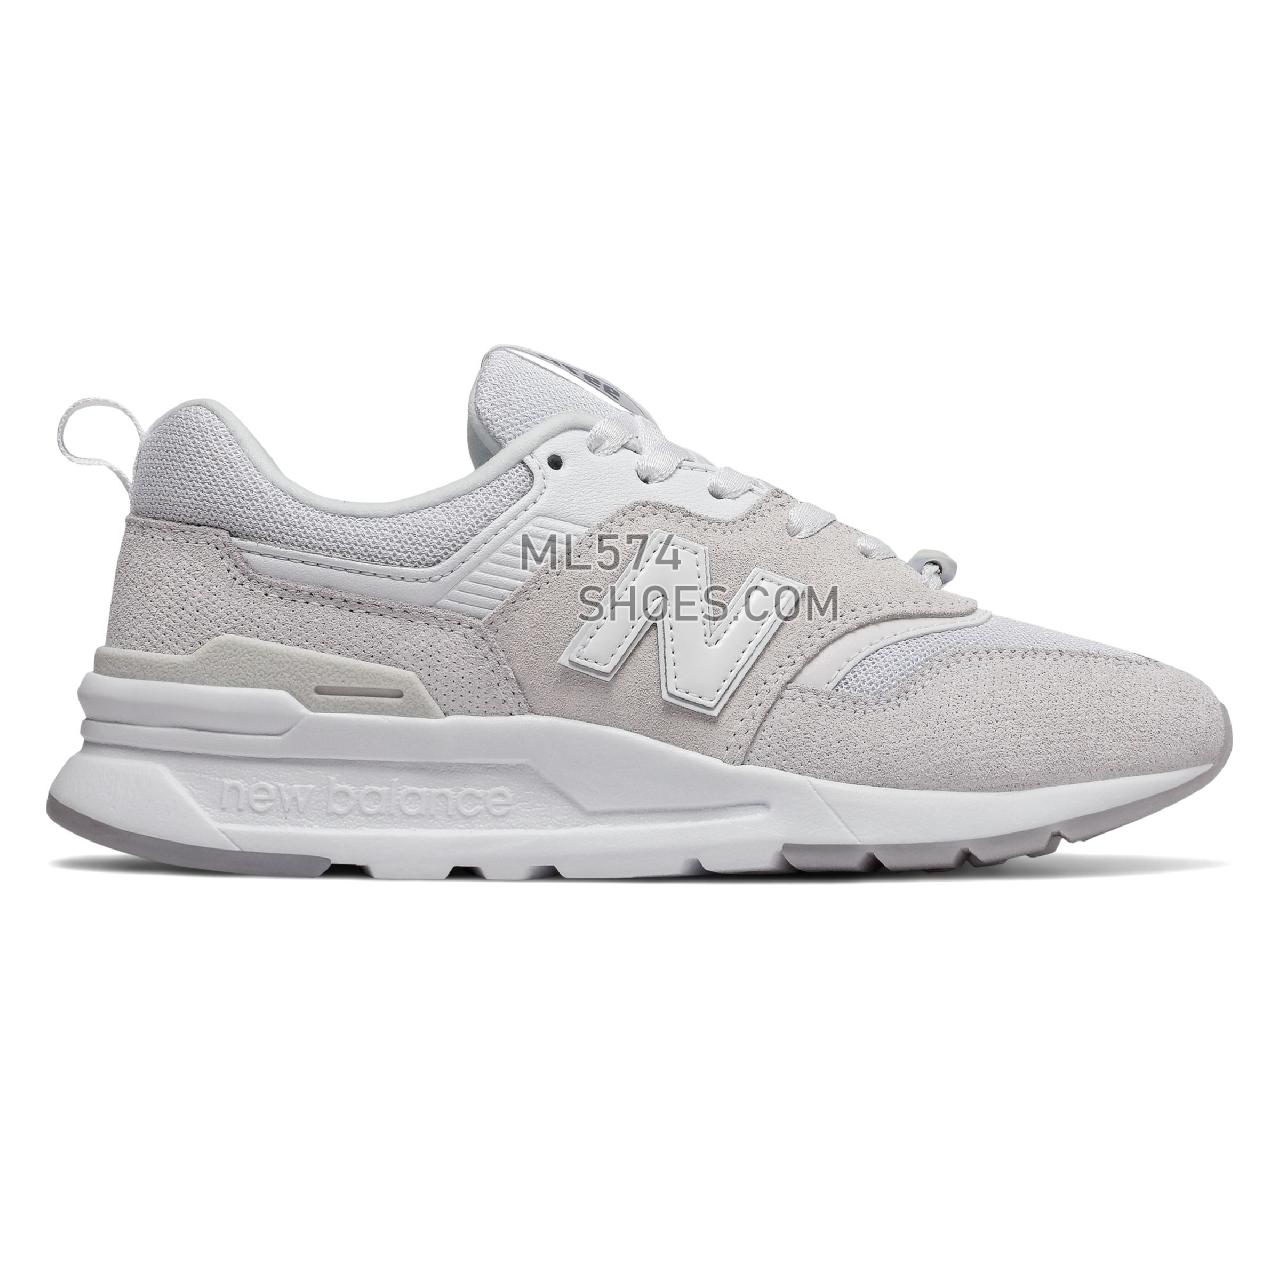 New Balance 997H Mystic Crystal - Women's Classic Sneakers - White - CW997HJC